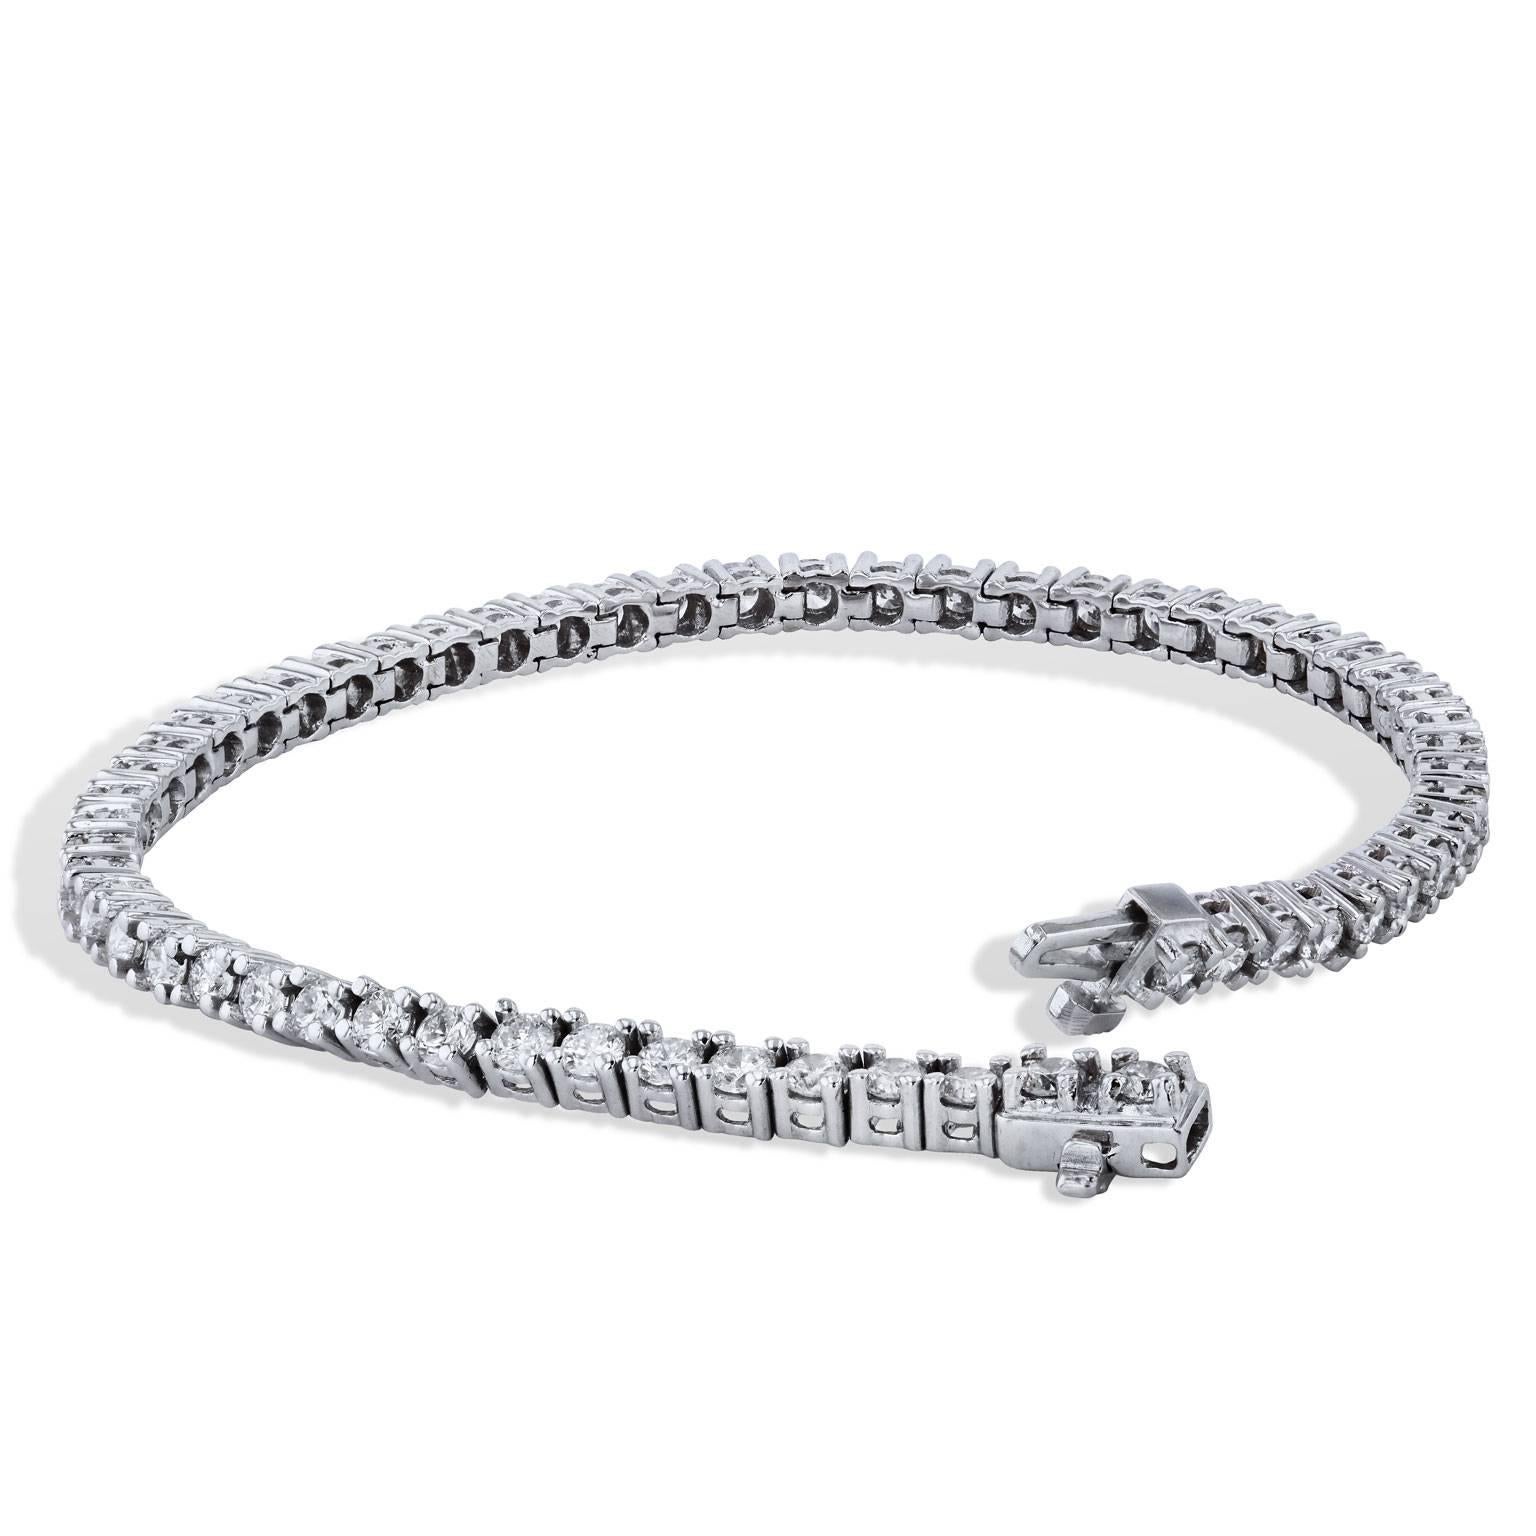 4.06 Carat Diamond Tennis Bracelet Set in 18 karat White Gold  

This tennis bracelet features fifty-eight diamonds, with a total weight of 4.06 carat (D/E/SI1/SI2).  Each diamond is set in a four prong setting and it's all made in 18 karat white